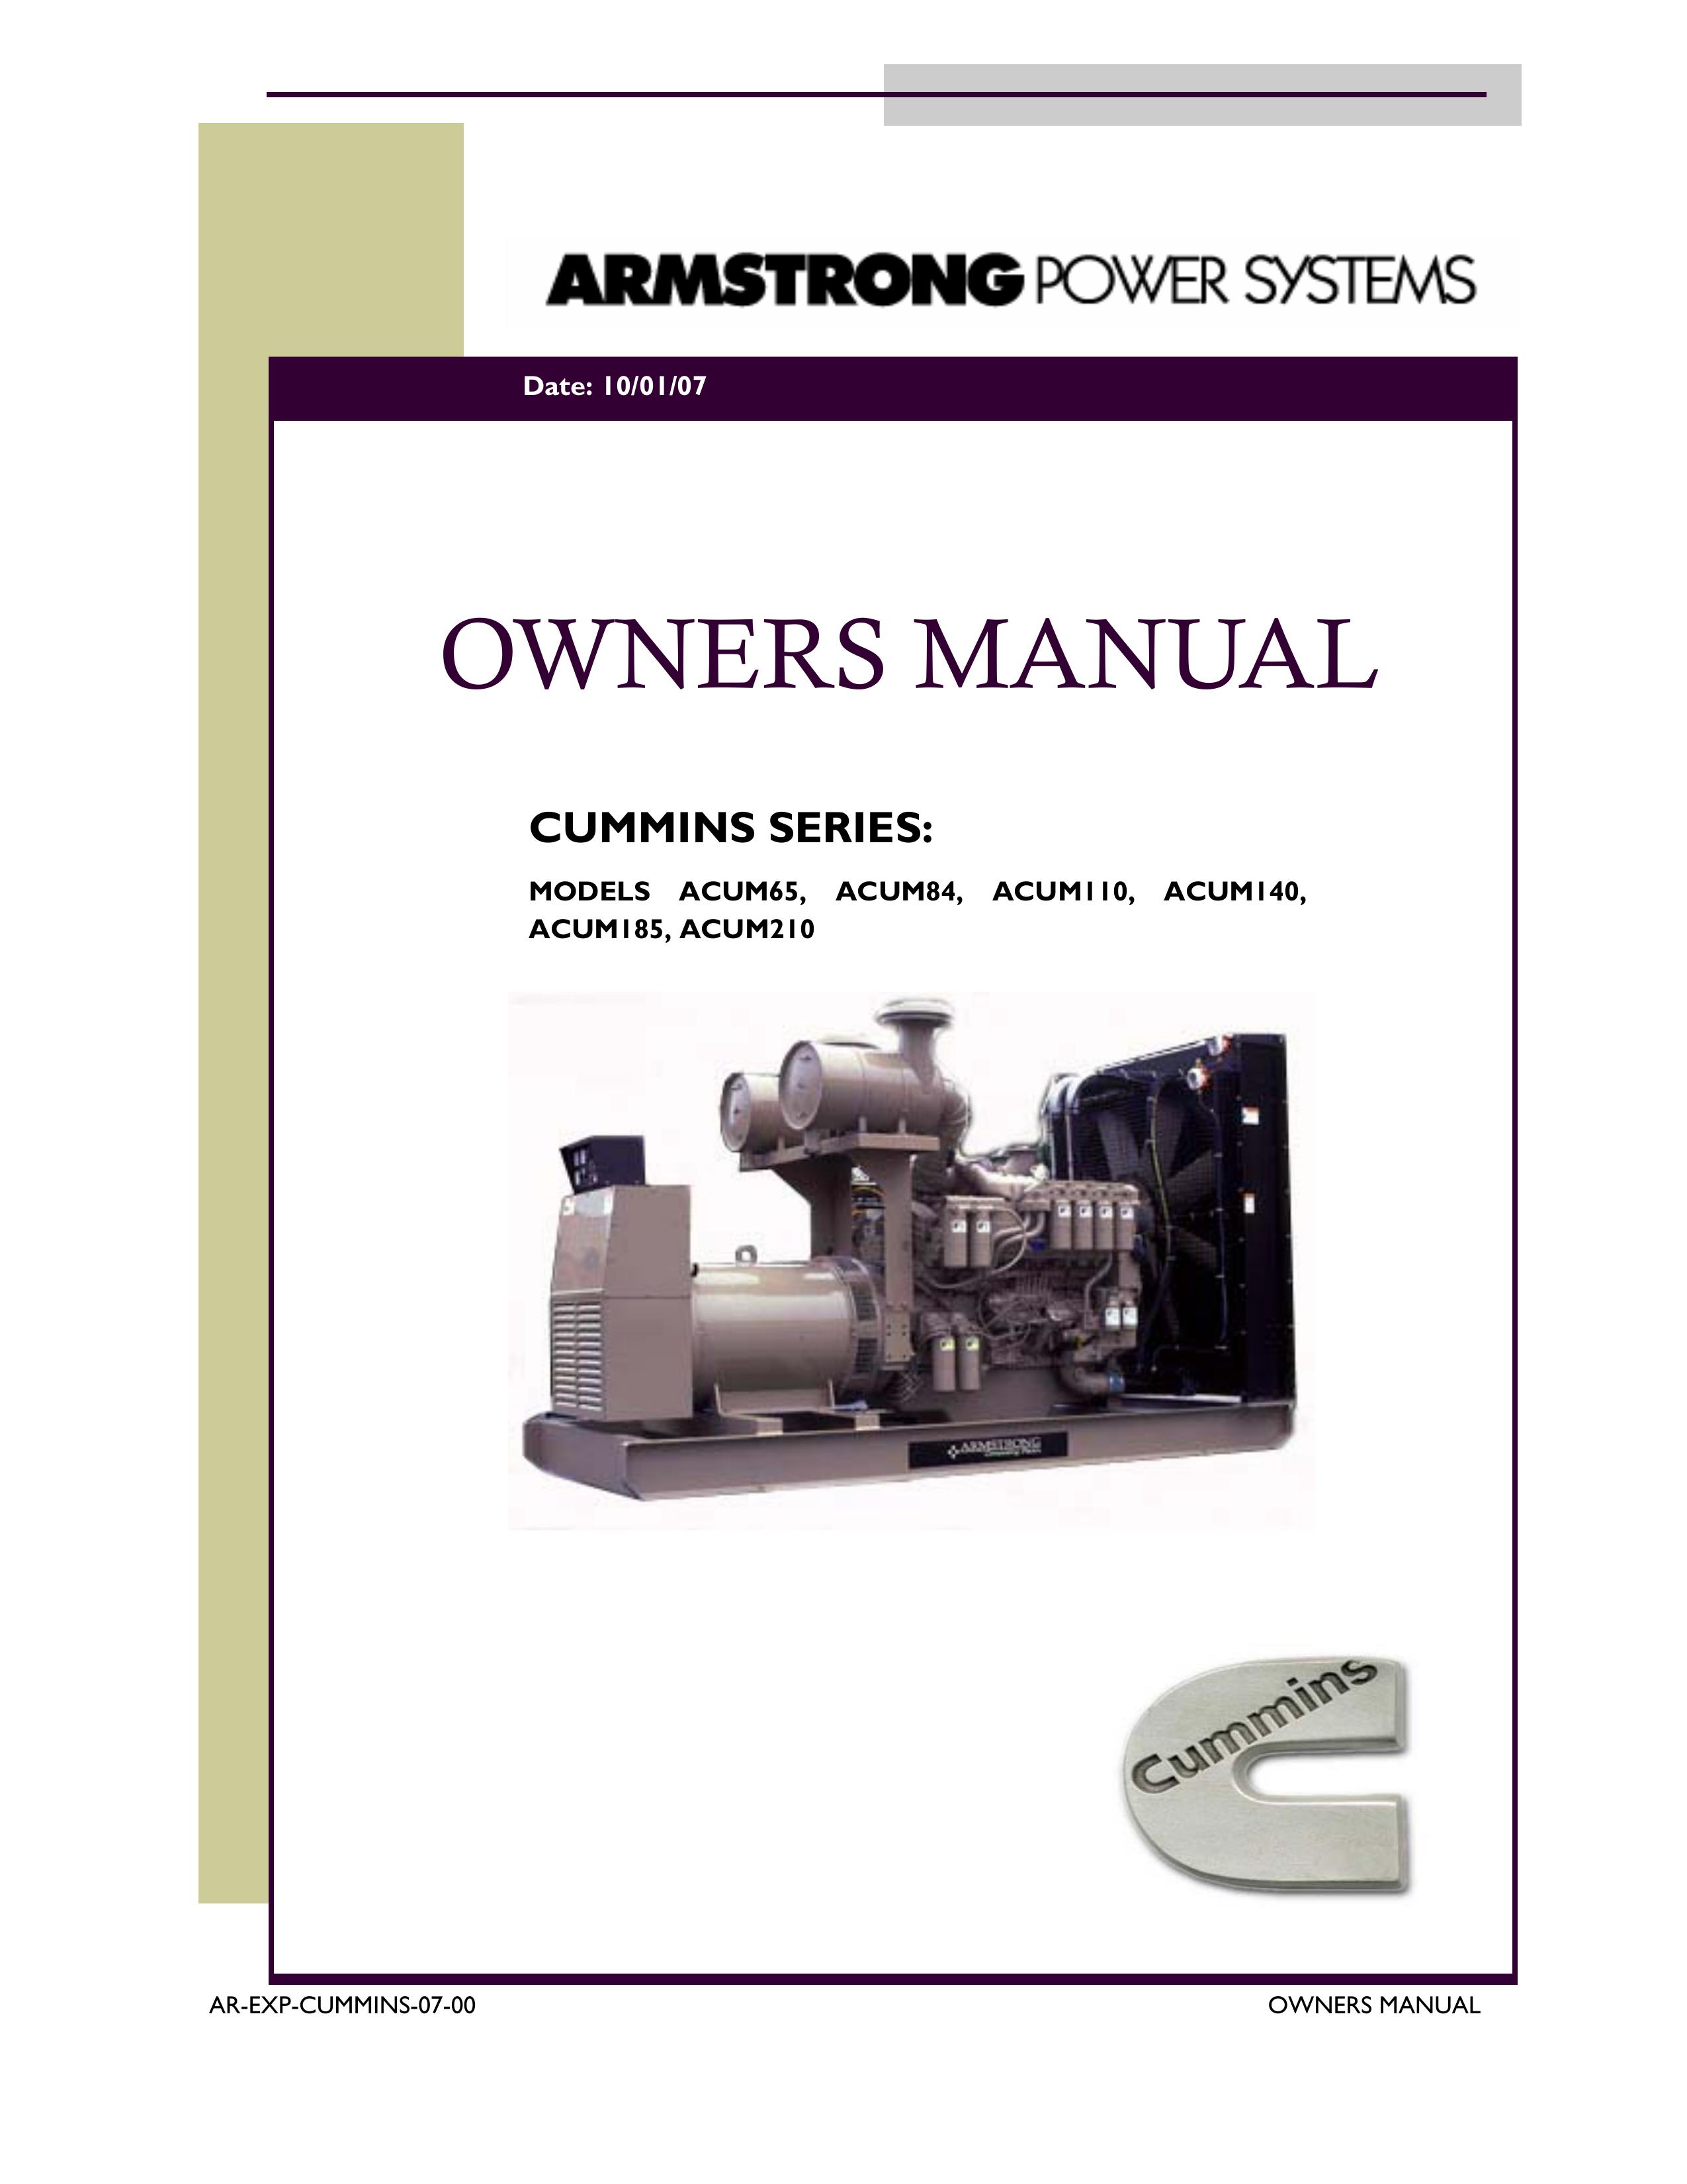 Armstrong World Industries ACUM185 Portable Generator User Manual